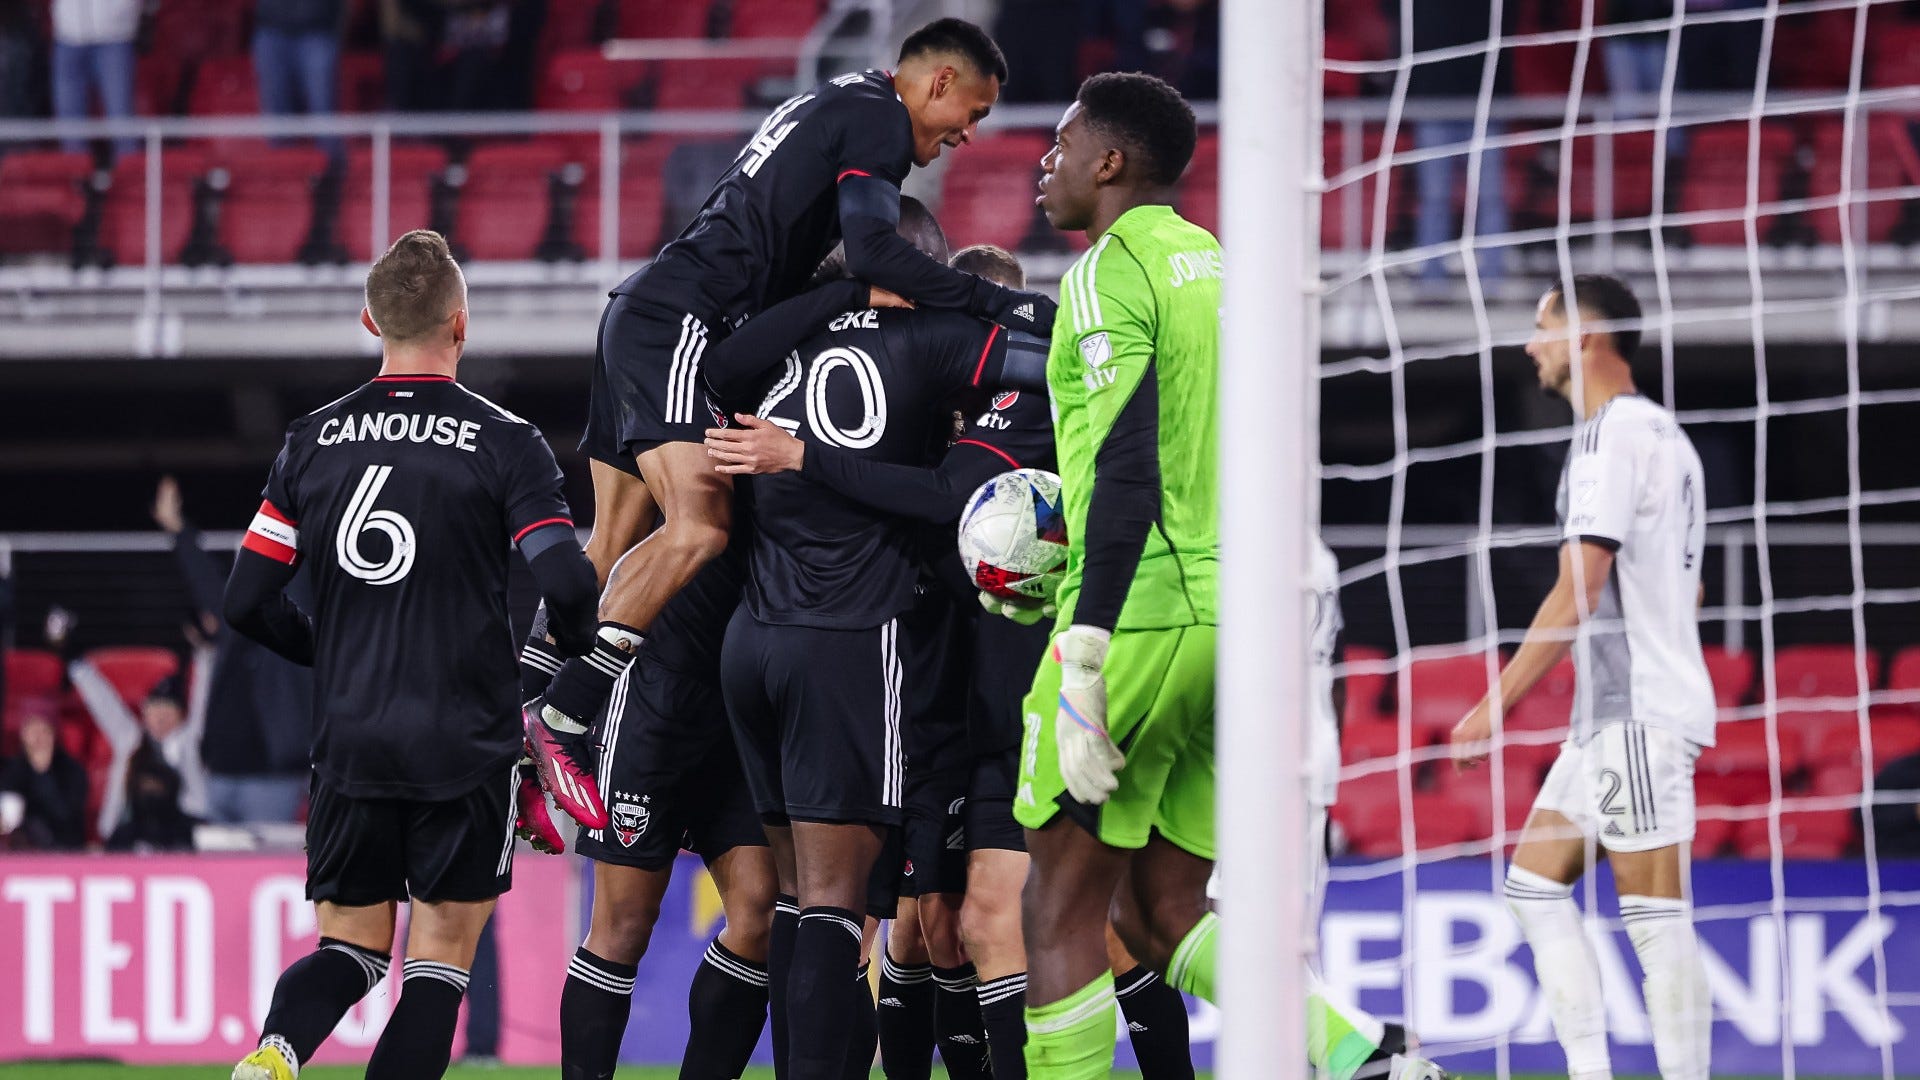 DC United vs Earthquakes Where to watch the match online, live stream, TV channels, and kick-off time Goal US